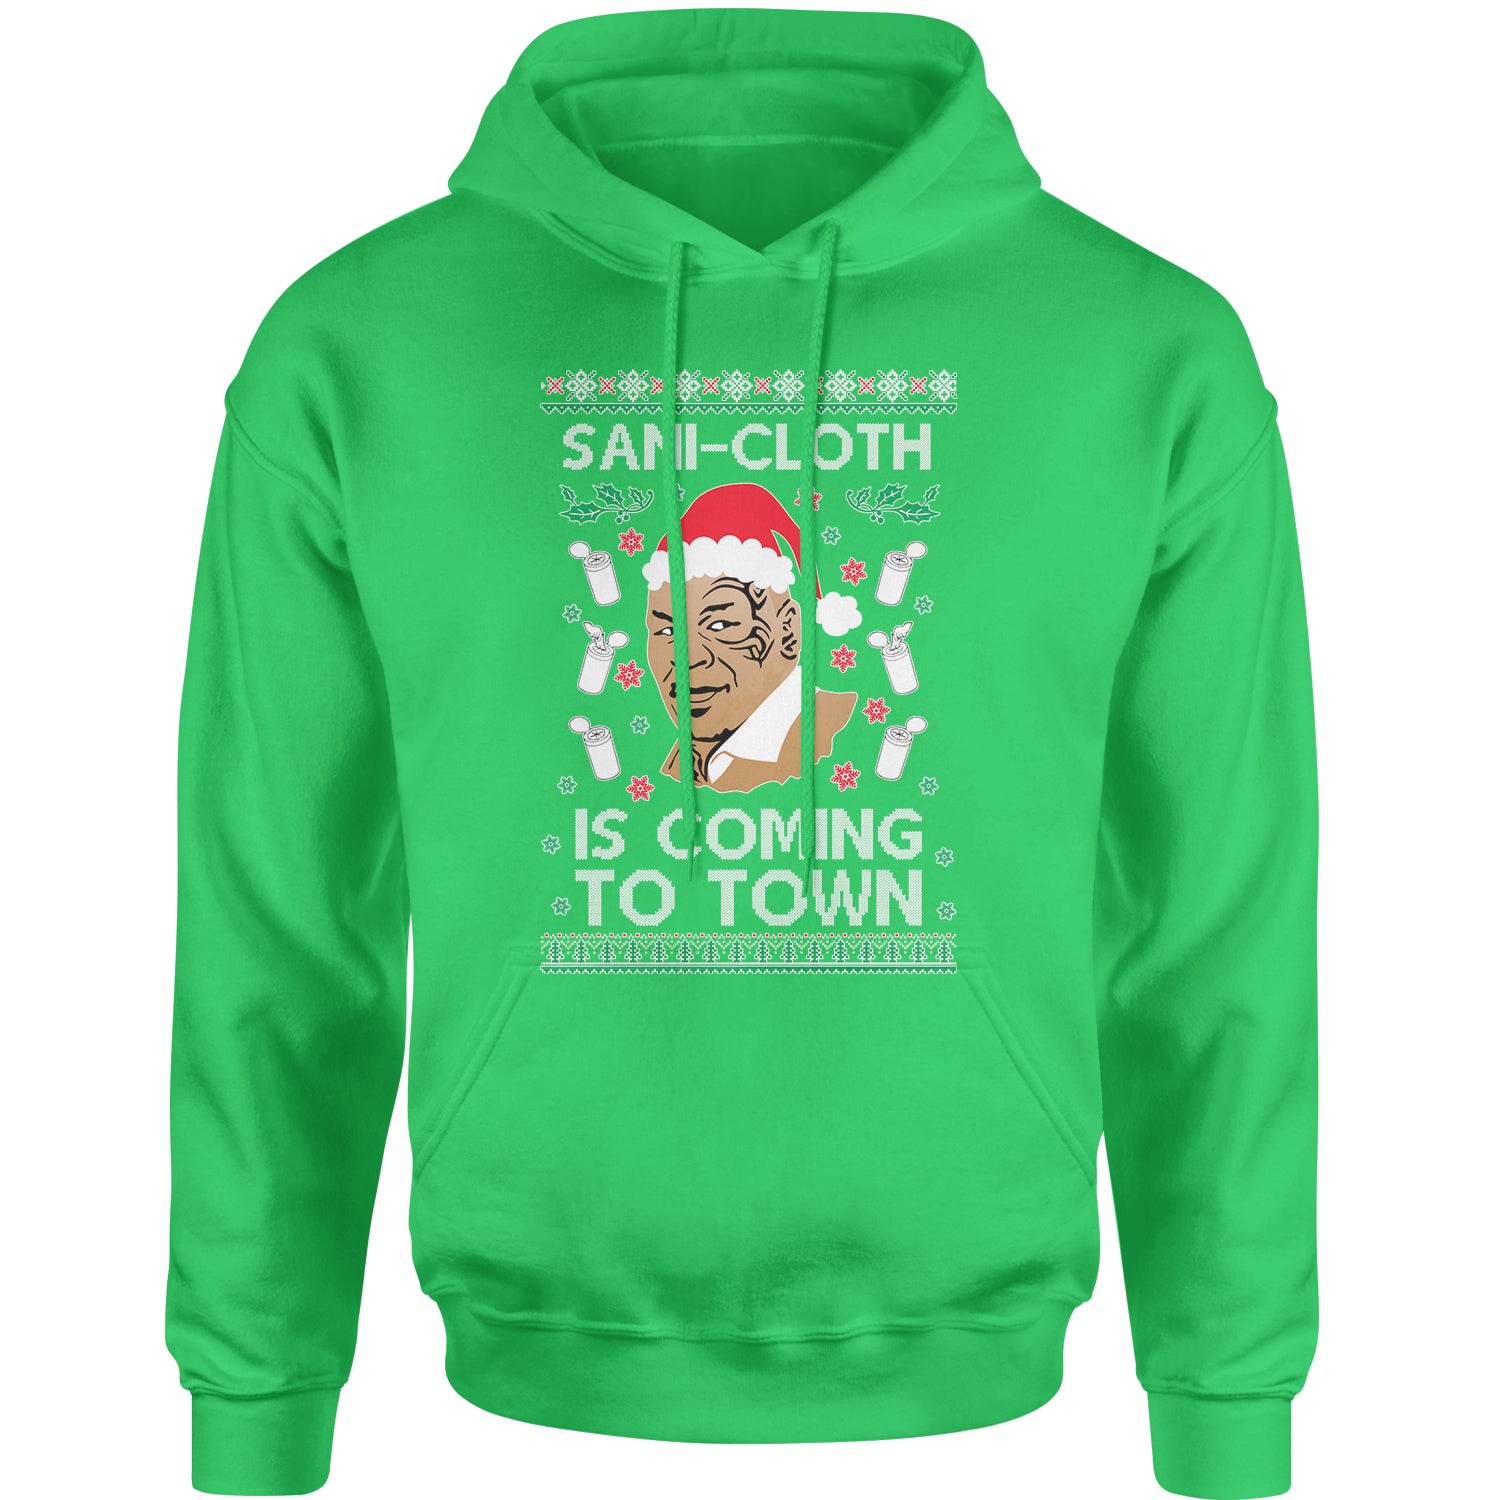 Sani-Cloth Is Coming To Town Ugly Christmas Adult Hoodie Sweatshirt 2021, mike, miketyson, tyson by Expression Tees